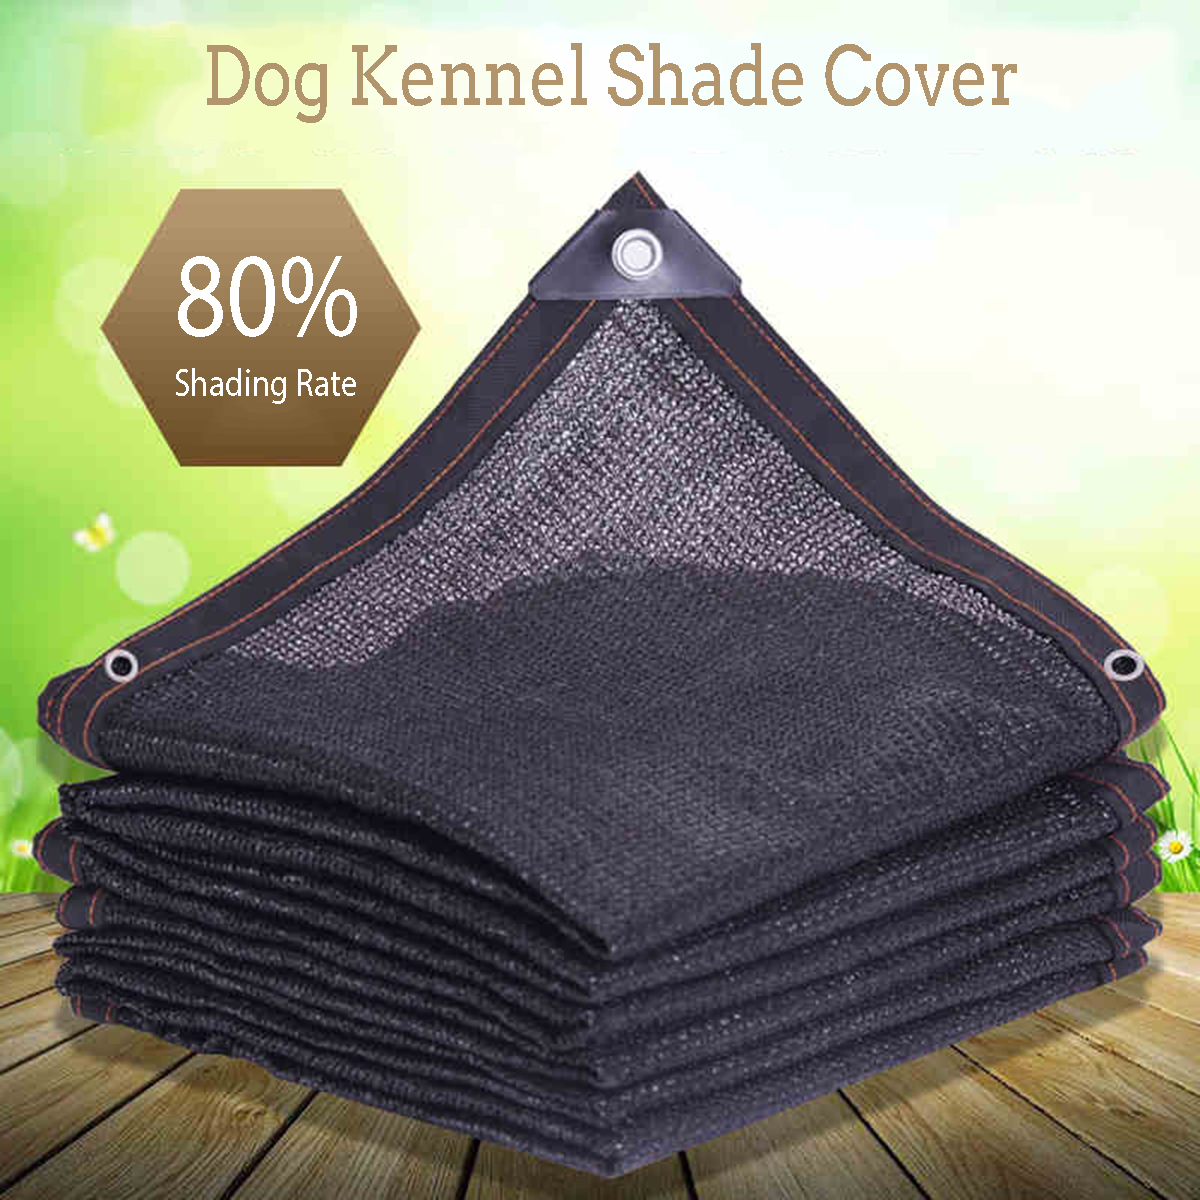 Sunshade-Net-Dog-Kennel-Puppy-Cat-Rabbit-Pet-Shade-Crate-Cover-Cage-Home-80-Sunblock-Shade-1614652-5